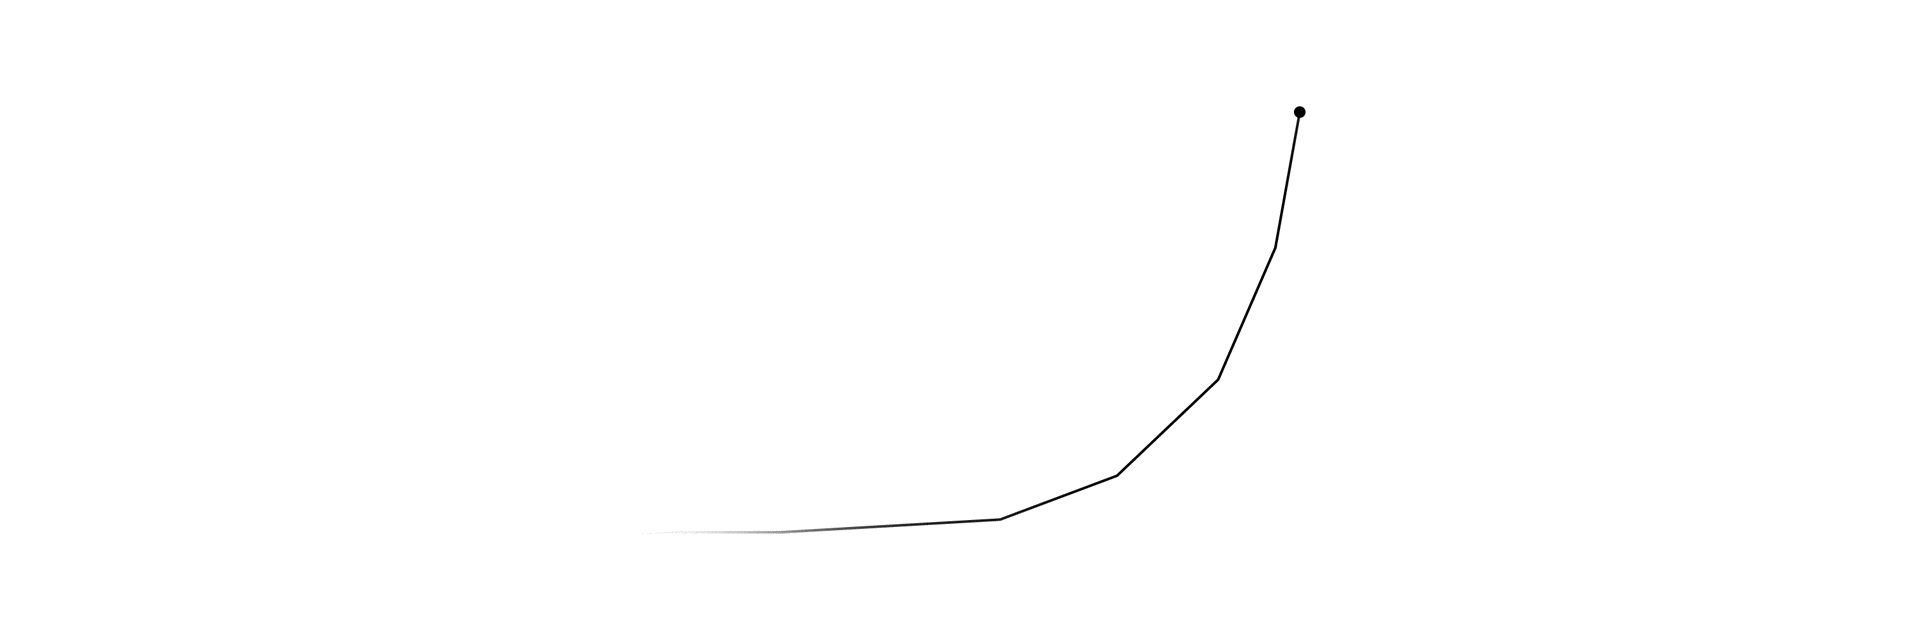 A graph of exponential change